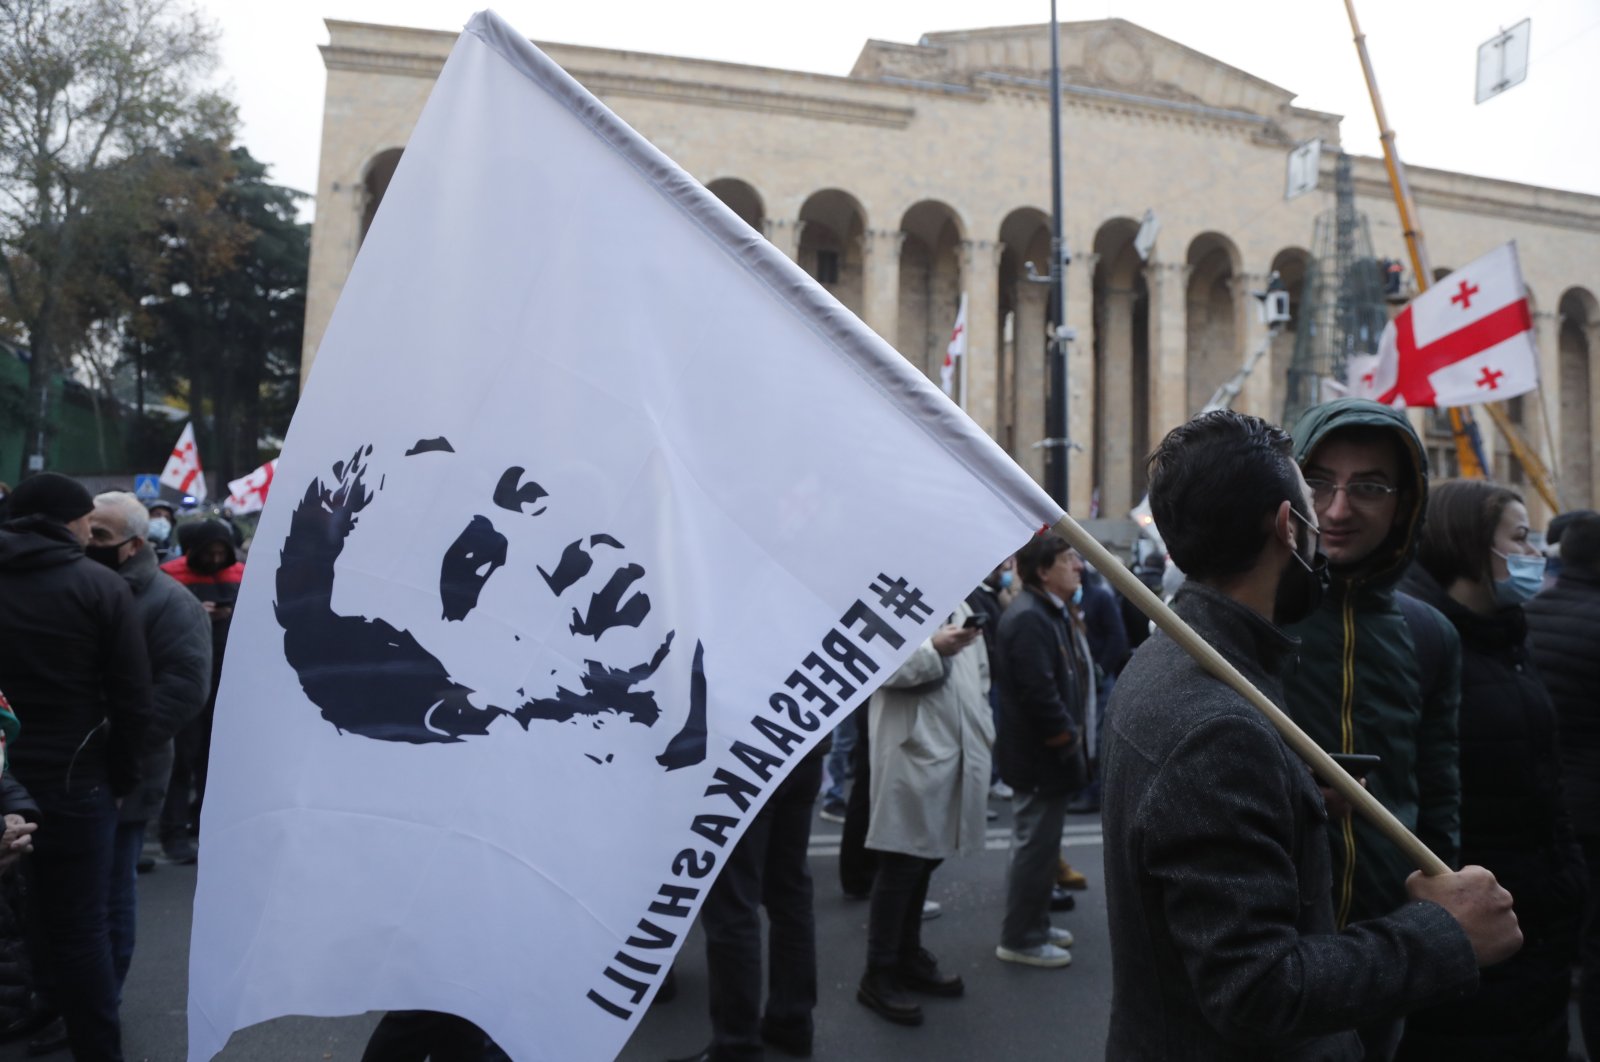 Participants of the &quot;United National Movement&quot; rally against the arrest of the former Georgian president Mikheil Saakashvili in Tbilisi, Georgia, Nov. 19, 2021. (EPA Photo)